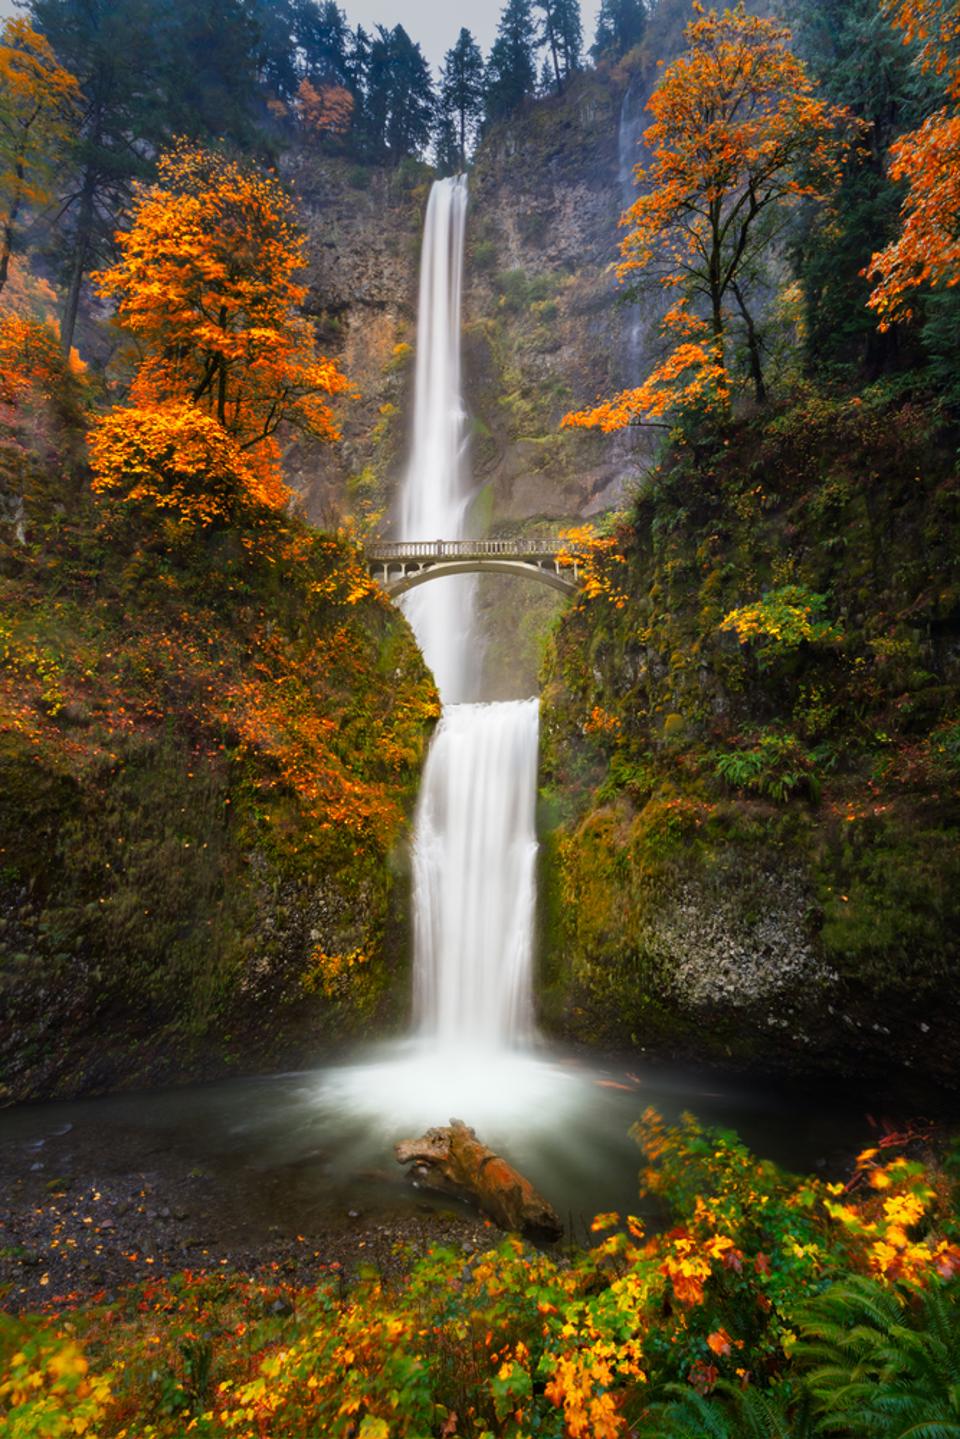 Oregon's Multnomah Falls outside of Portland are awe-inspiring. And quite photographable.